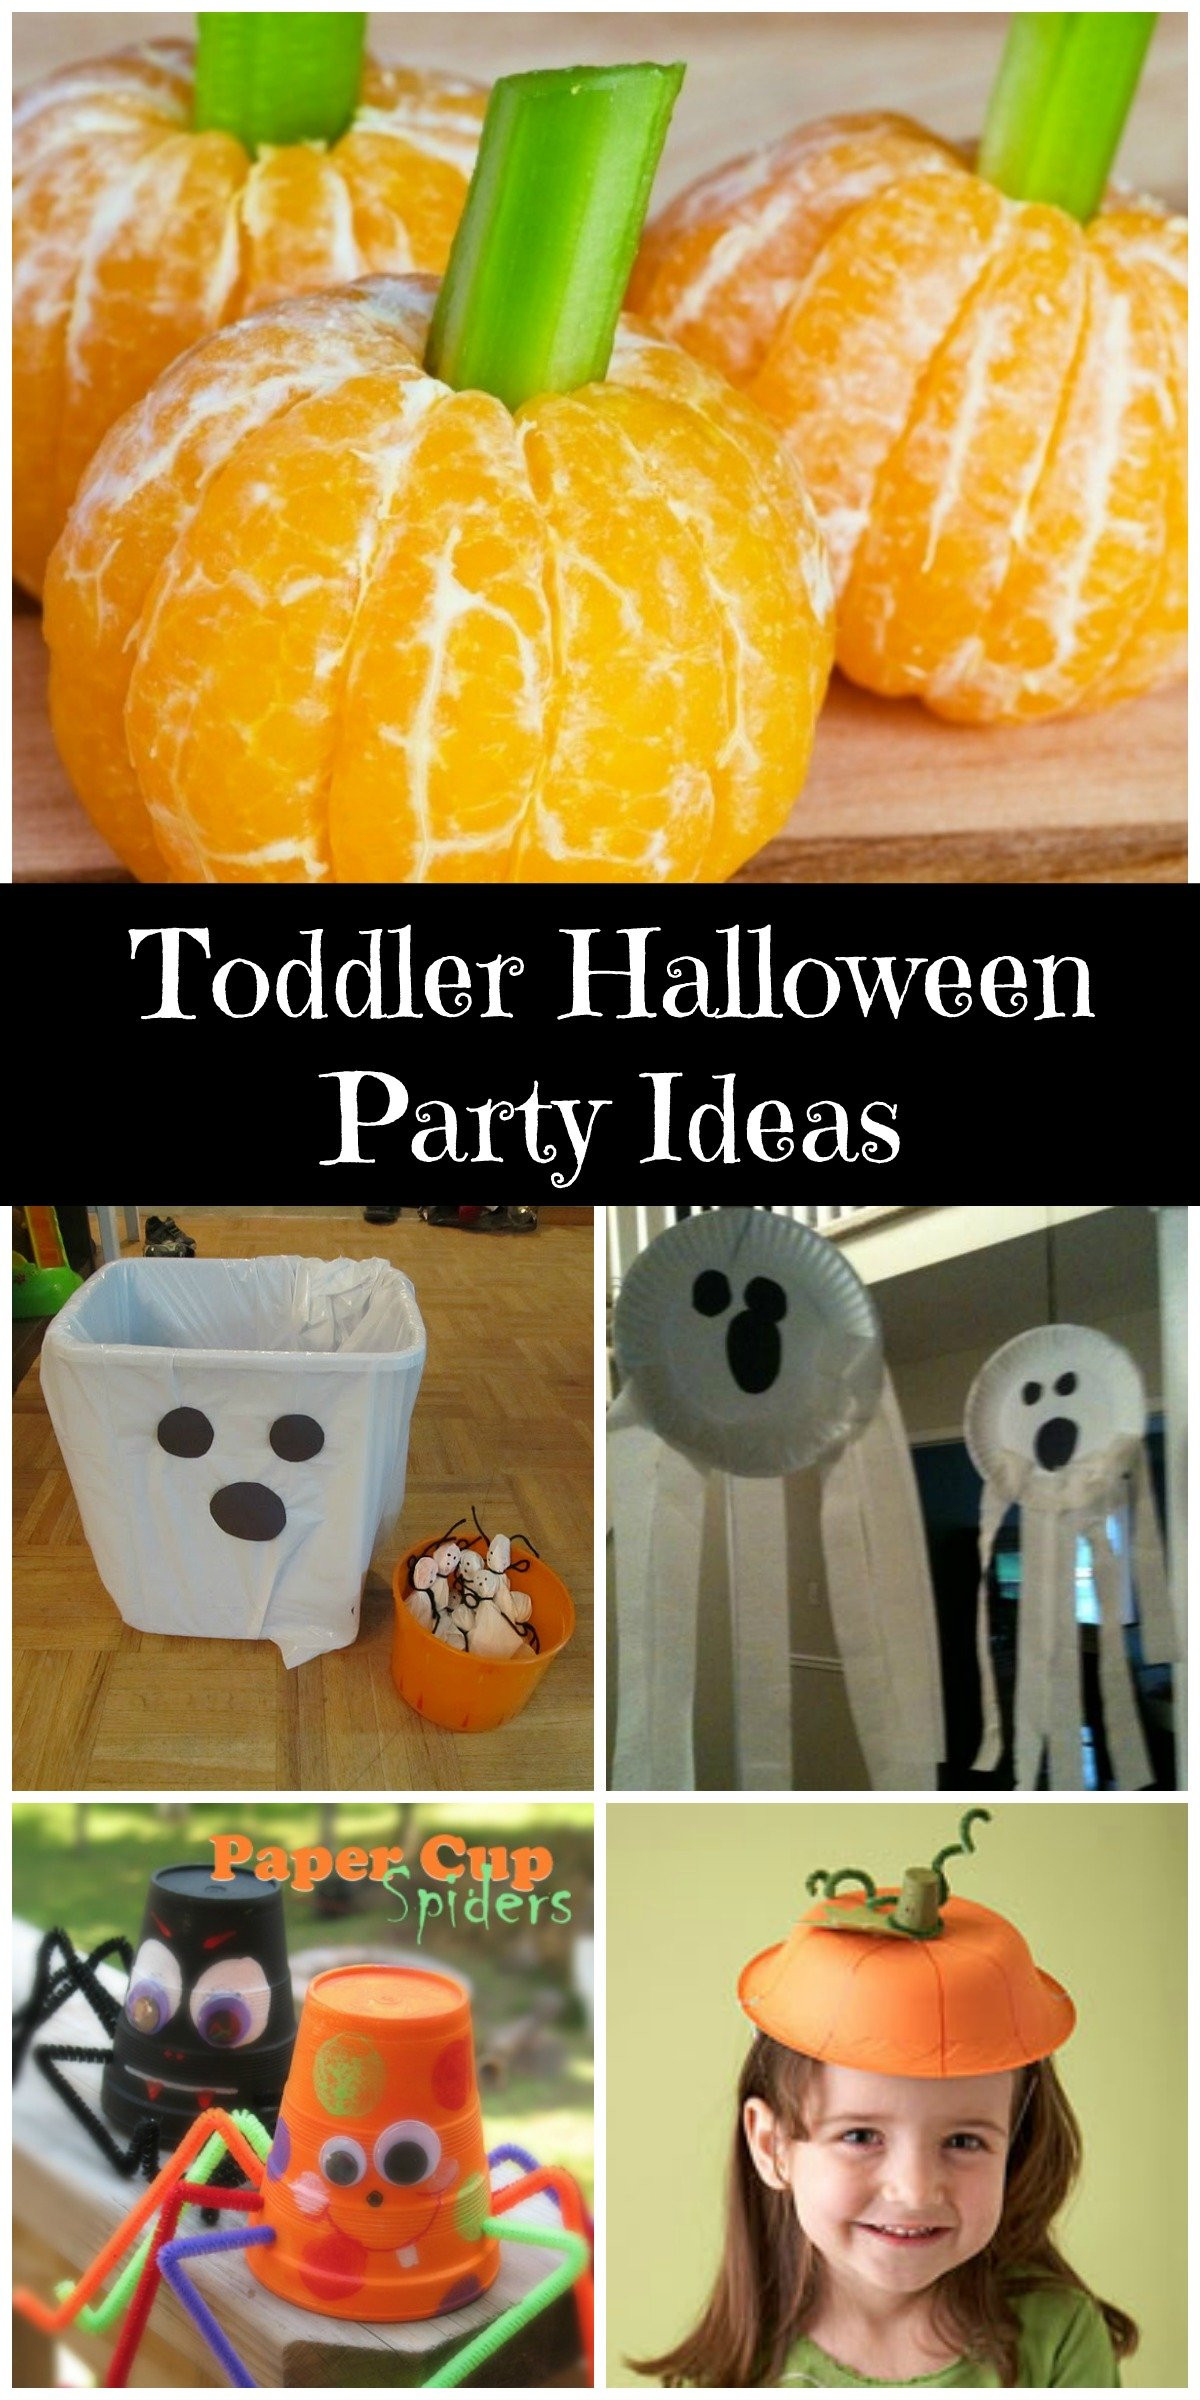 Toddlers Halloween Party Ideas
 Toddler Halloween Party Creative Ramblings